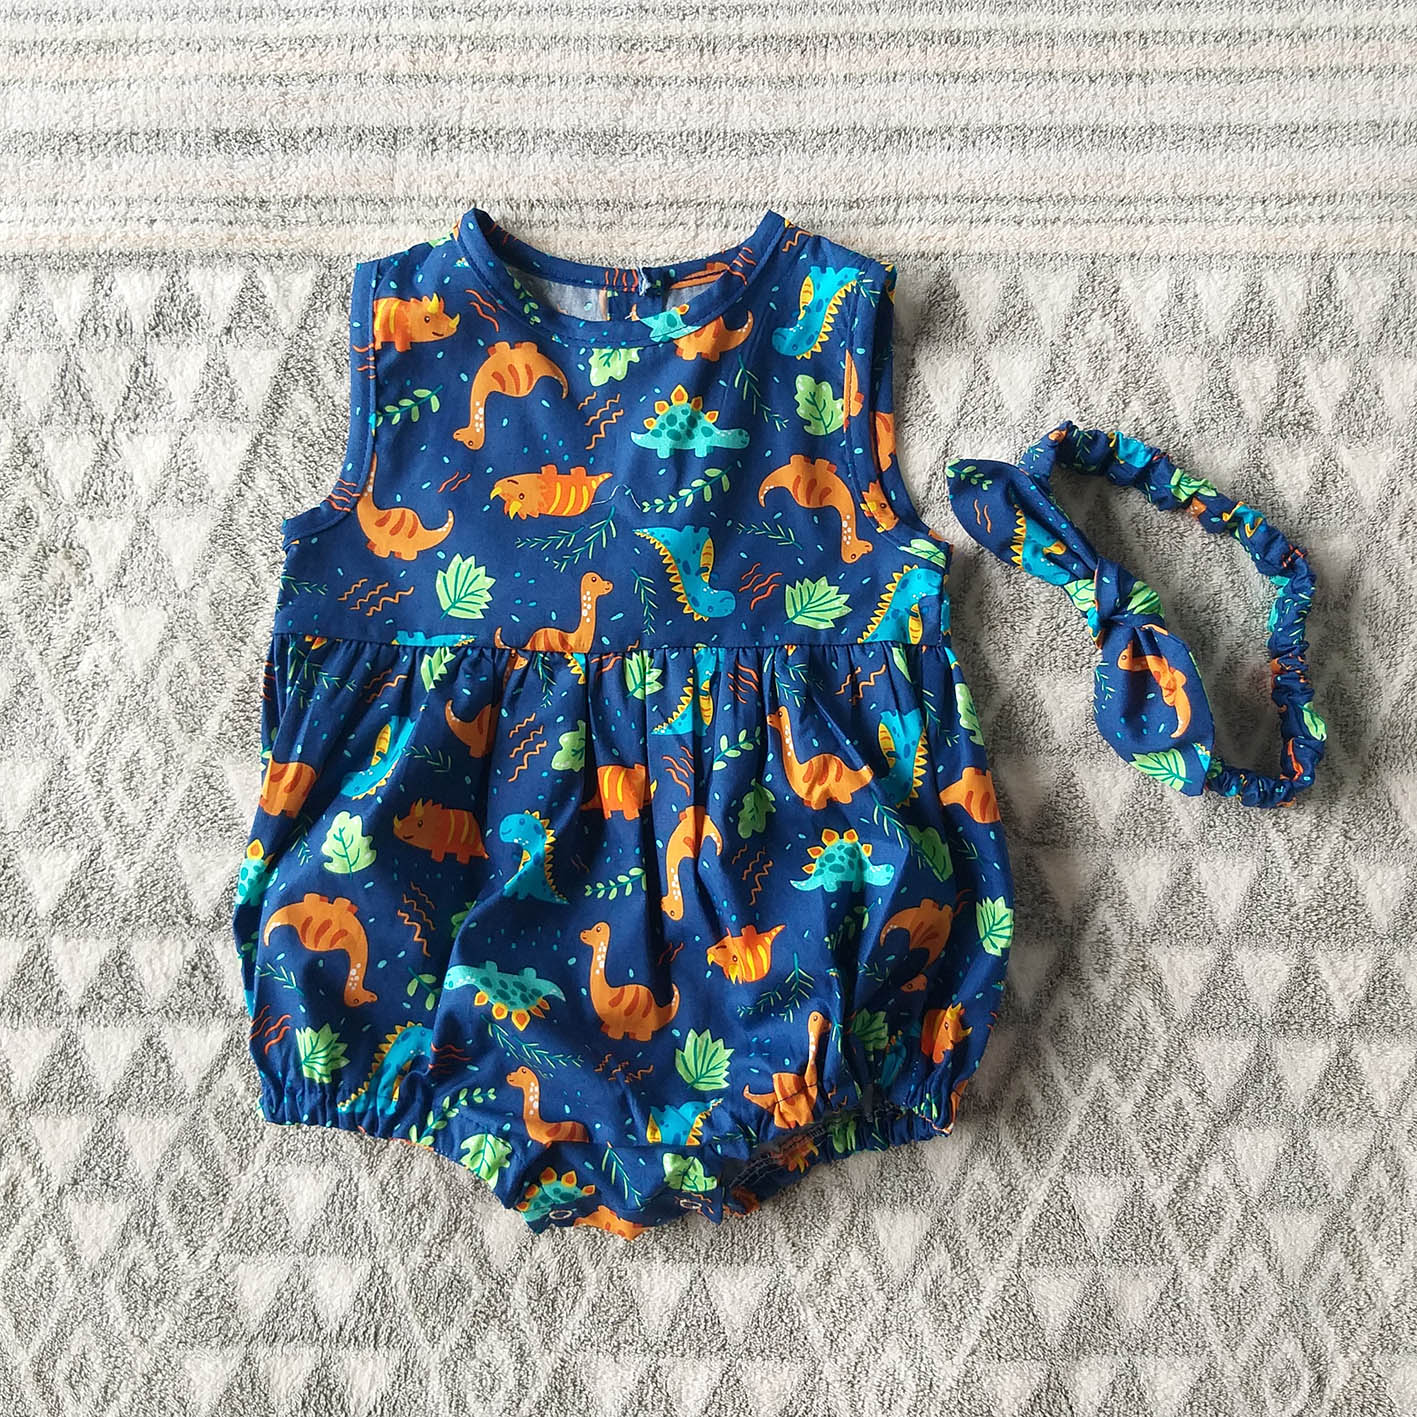 DINOSAUR BUTTONS BACK ROMPER 100% PRINTED COTTON*HEADBAND NOT INCLUDED